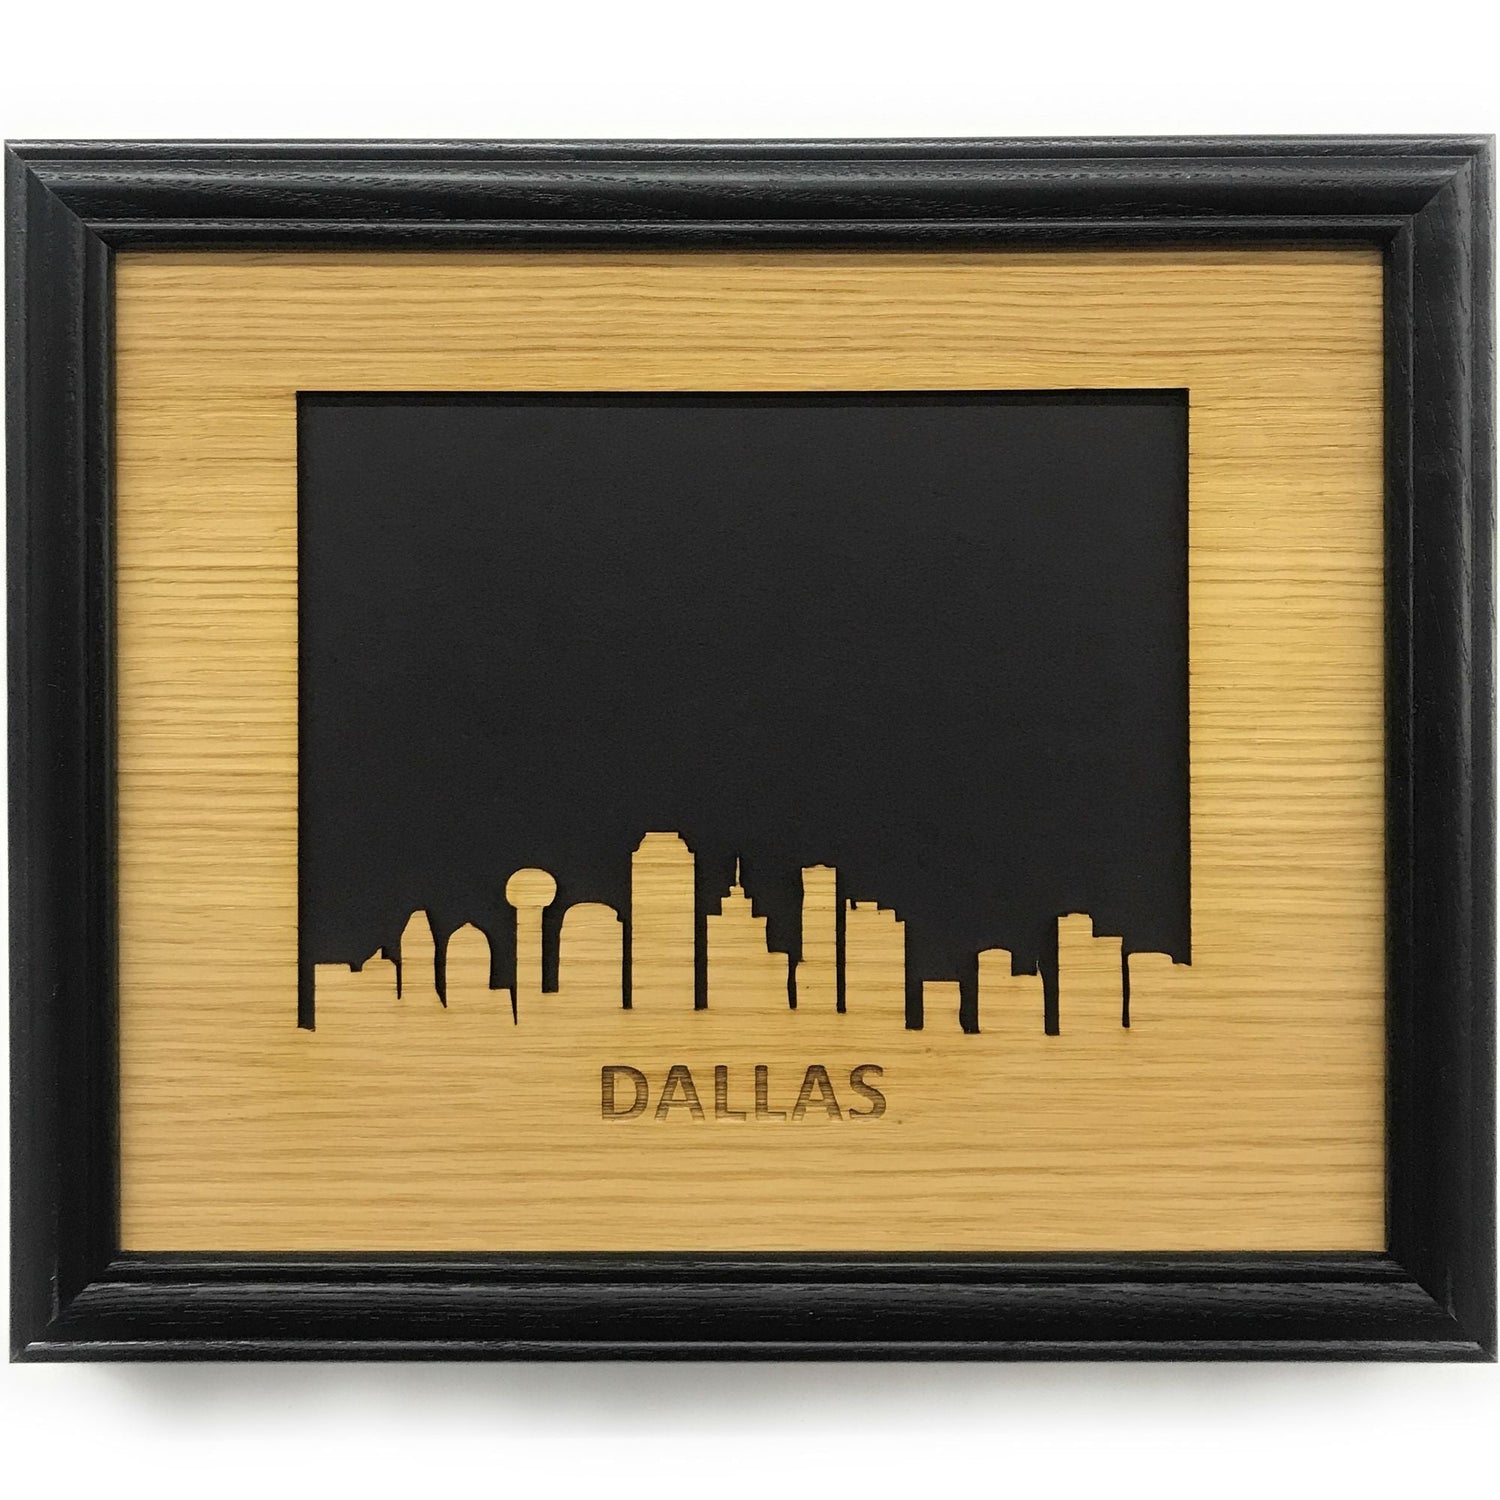 Dallas Picture Frame - 8x10 Frame Hold 5x7 Photo - Dallas Picture Frame - 8x10 Frame Hold 5x7 Photo - Legacy Images - Picture Frames - Legacy Images - Picture Frames